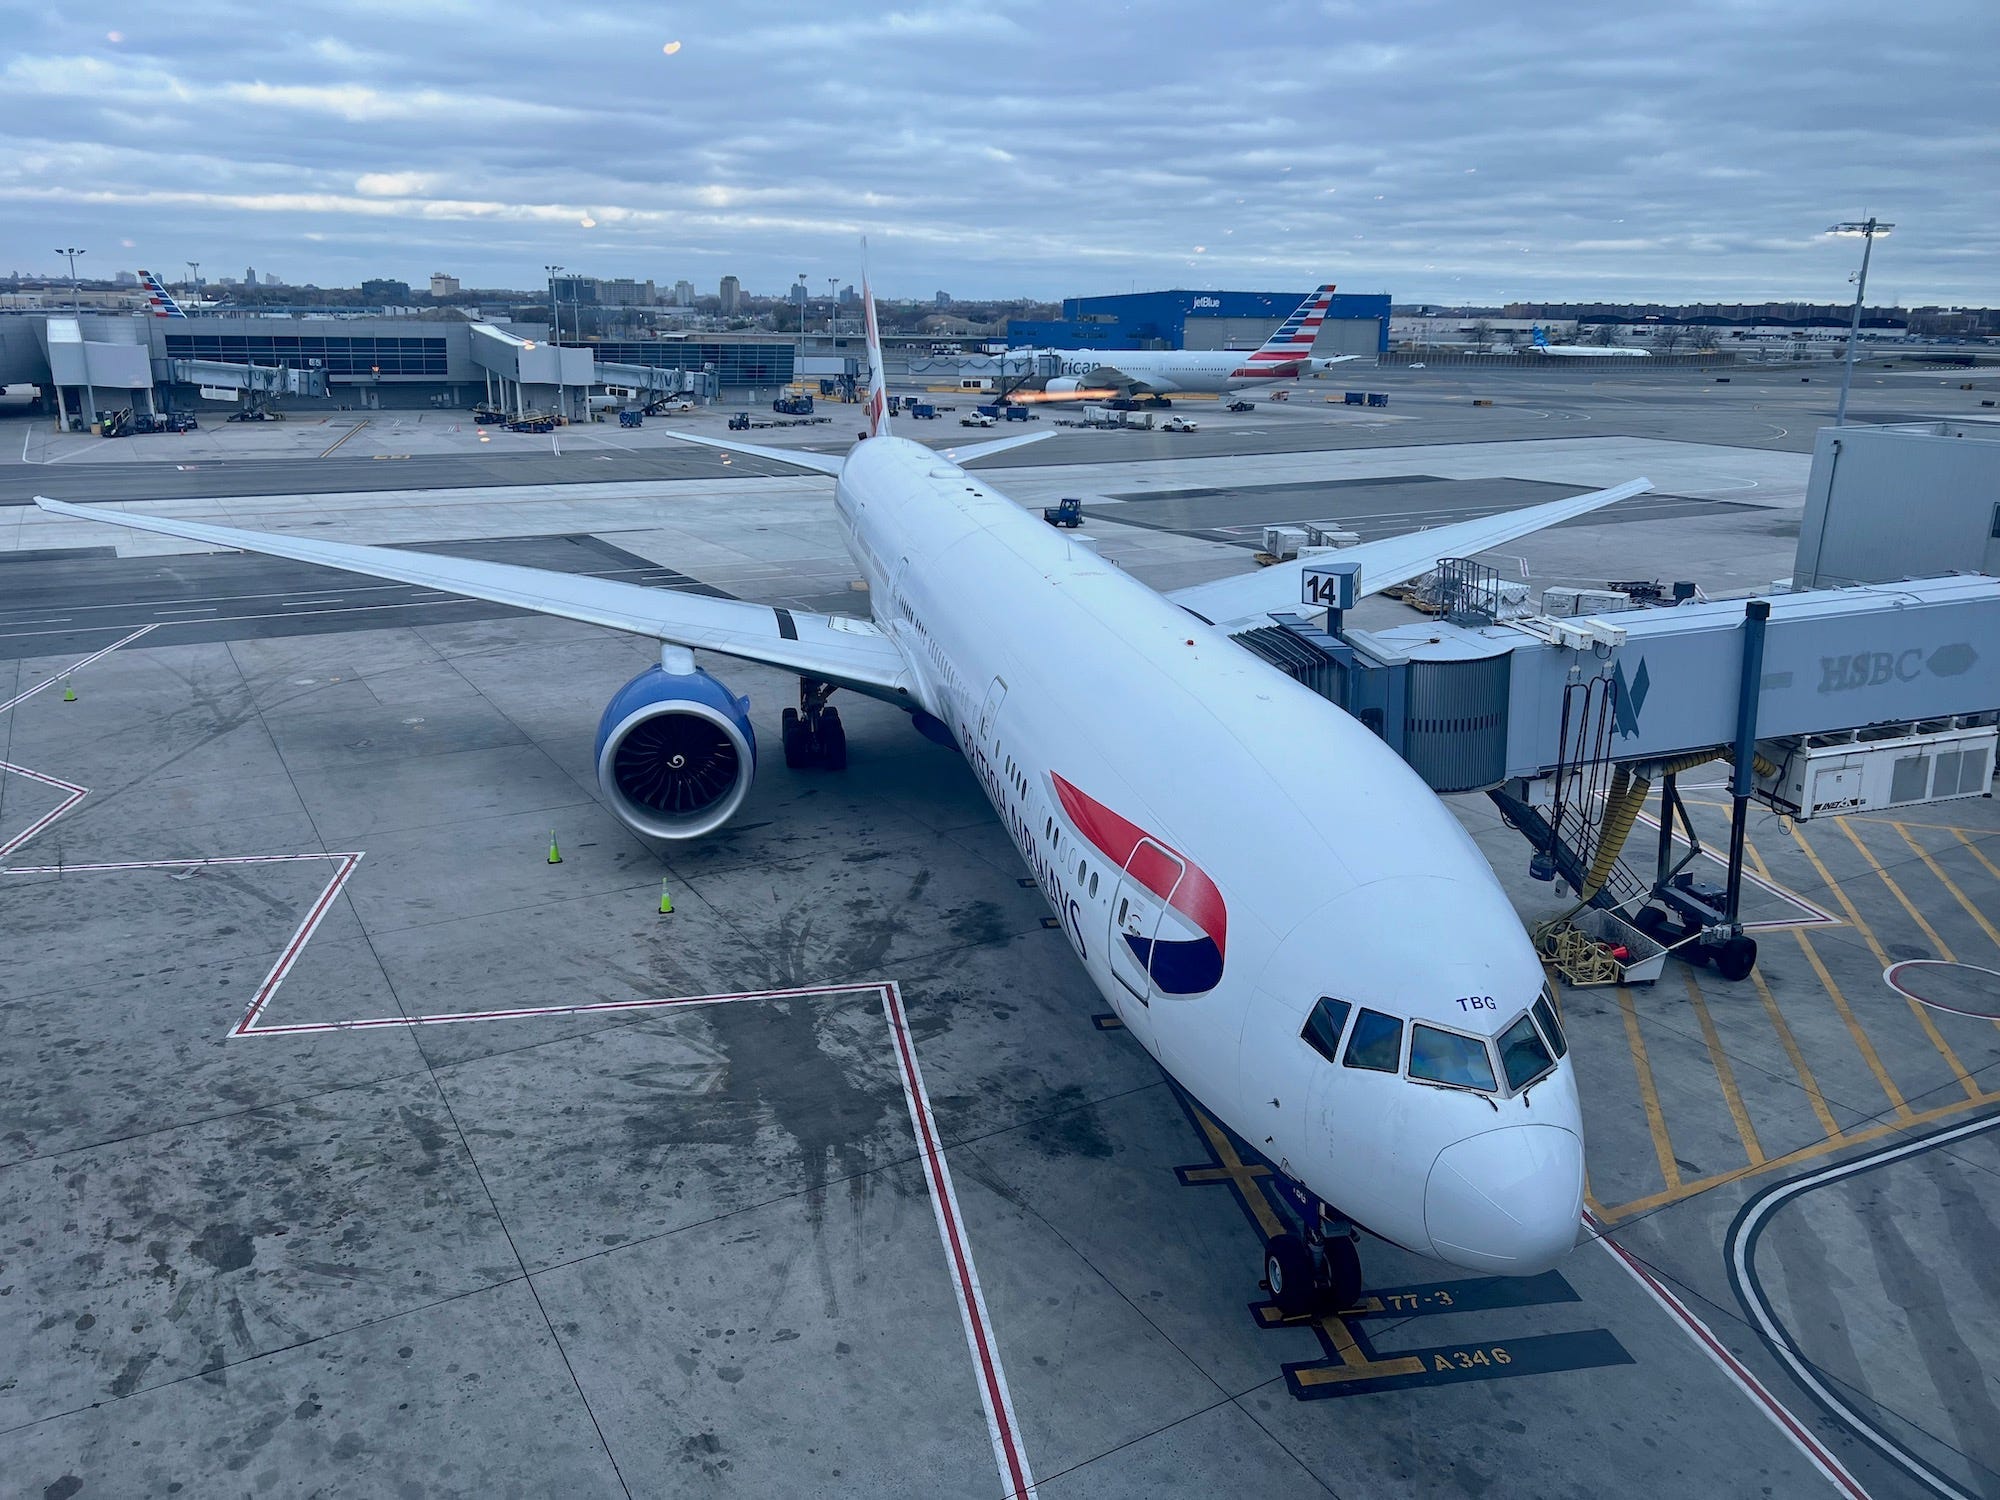 British Airways and American Airlines aircraft at JFK.